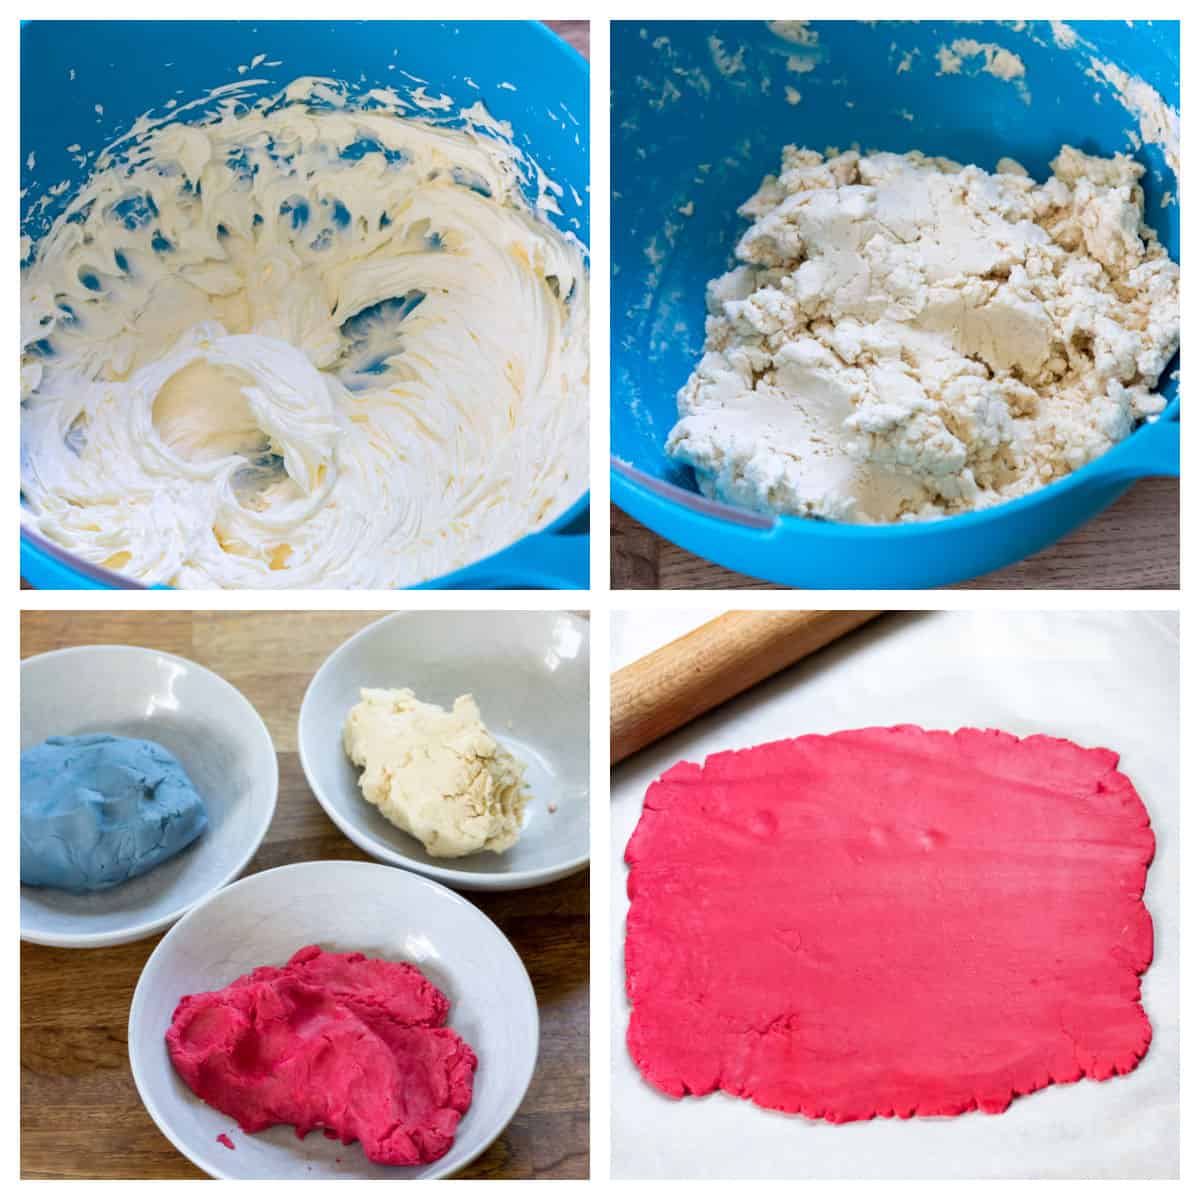 Making and coloring the shortbread cookie dough.